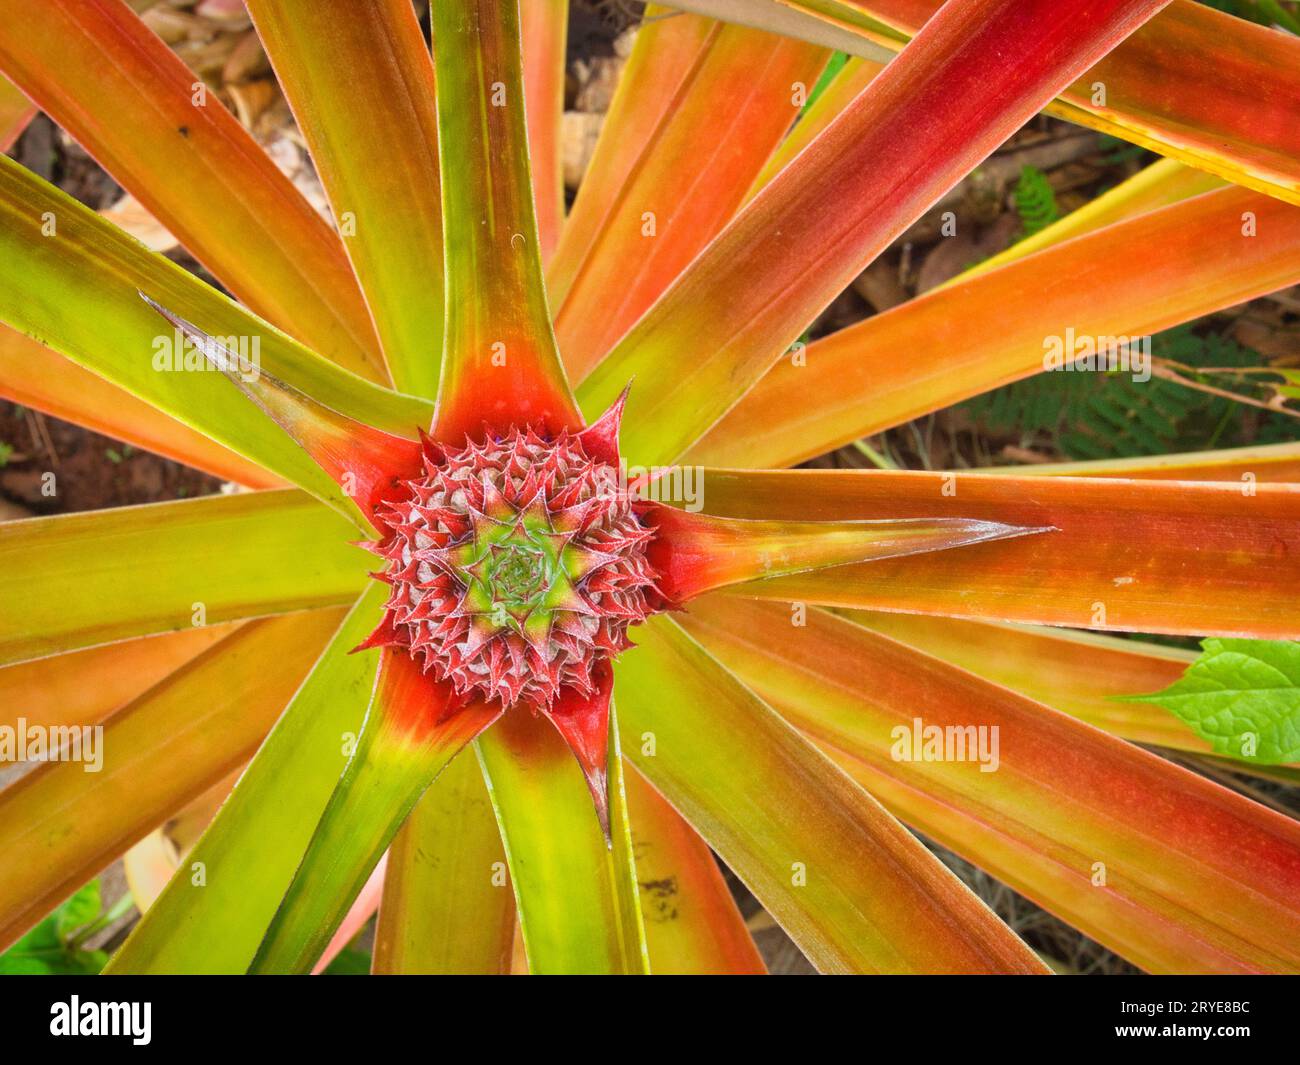 Top down view of green and red growing pineapple bromeliad in Hawaii botanical garden. Stock Photo